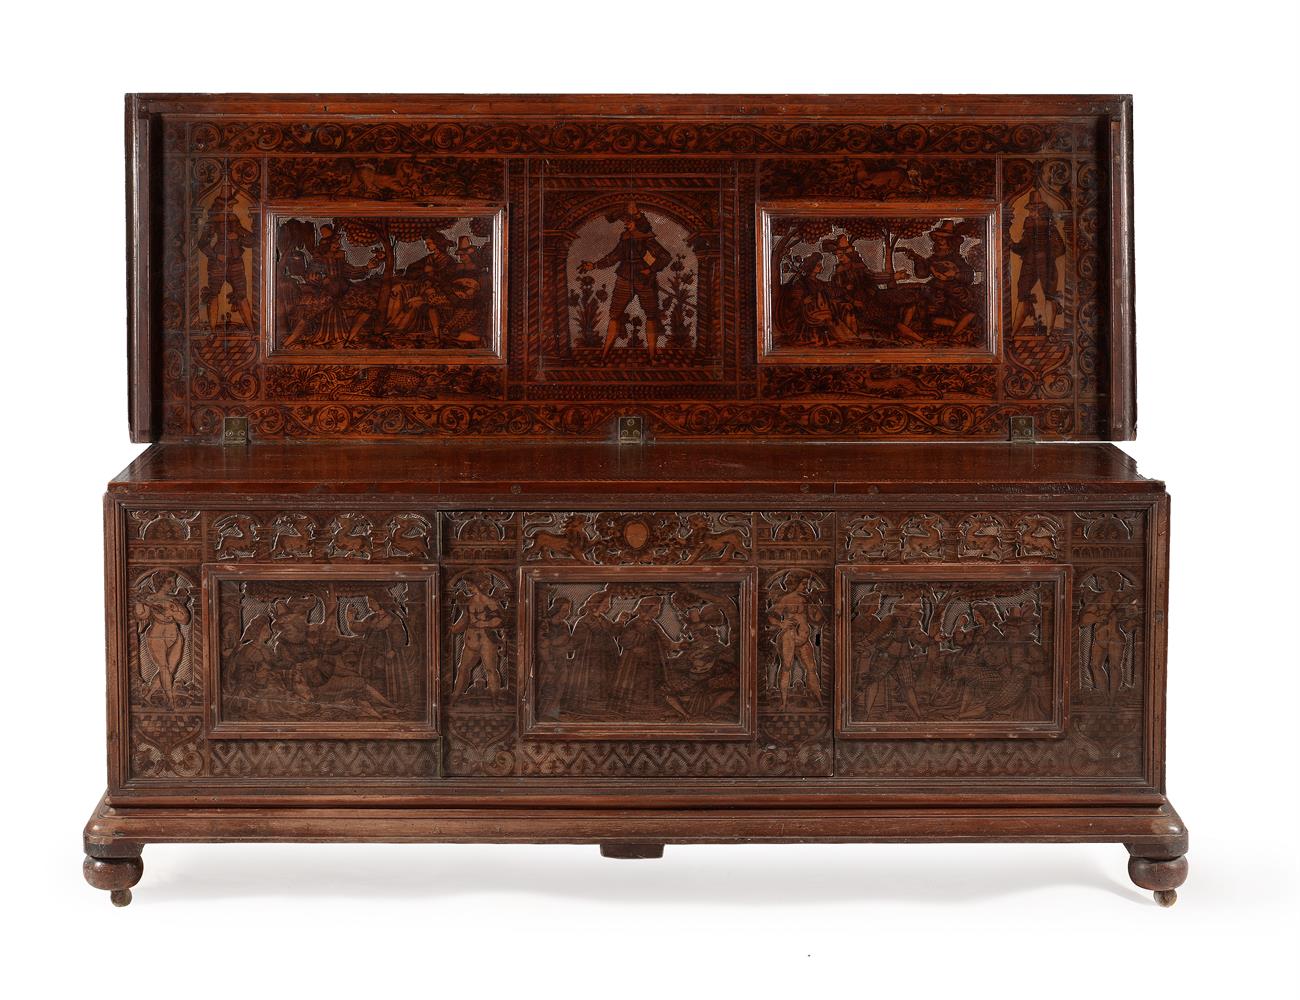 AN ITALIAN CARVED AND POKERWORK DECORATED CHEST OR CASSONE, 16TH CENTURY AND LATER - Image 2 of 12